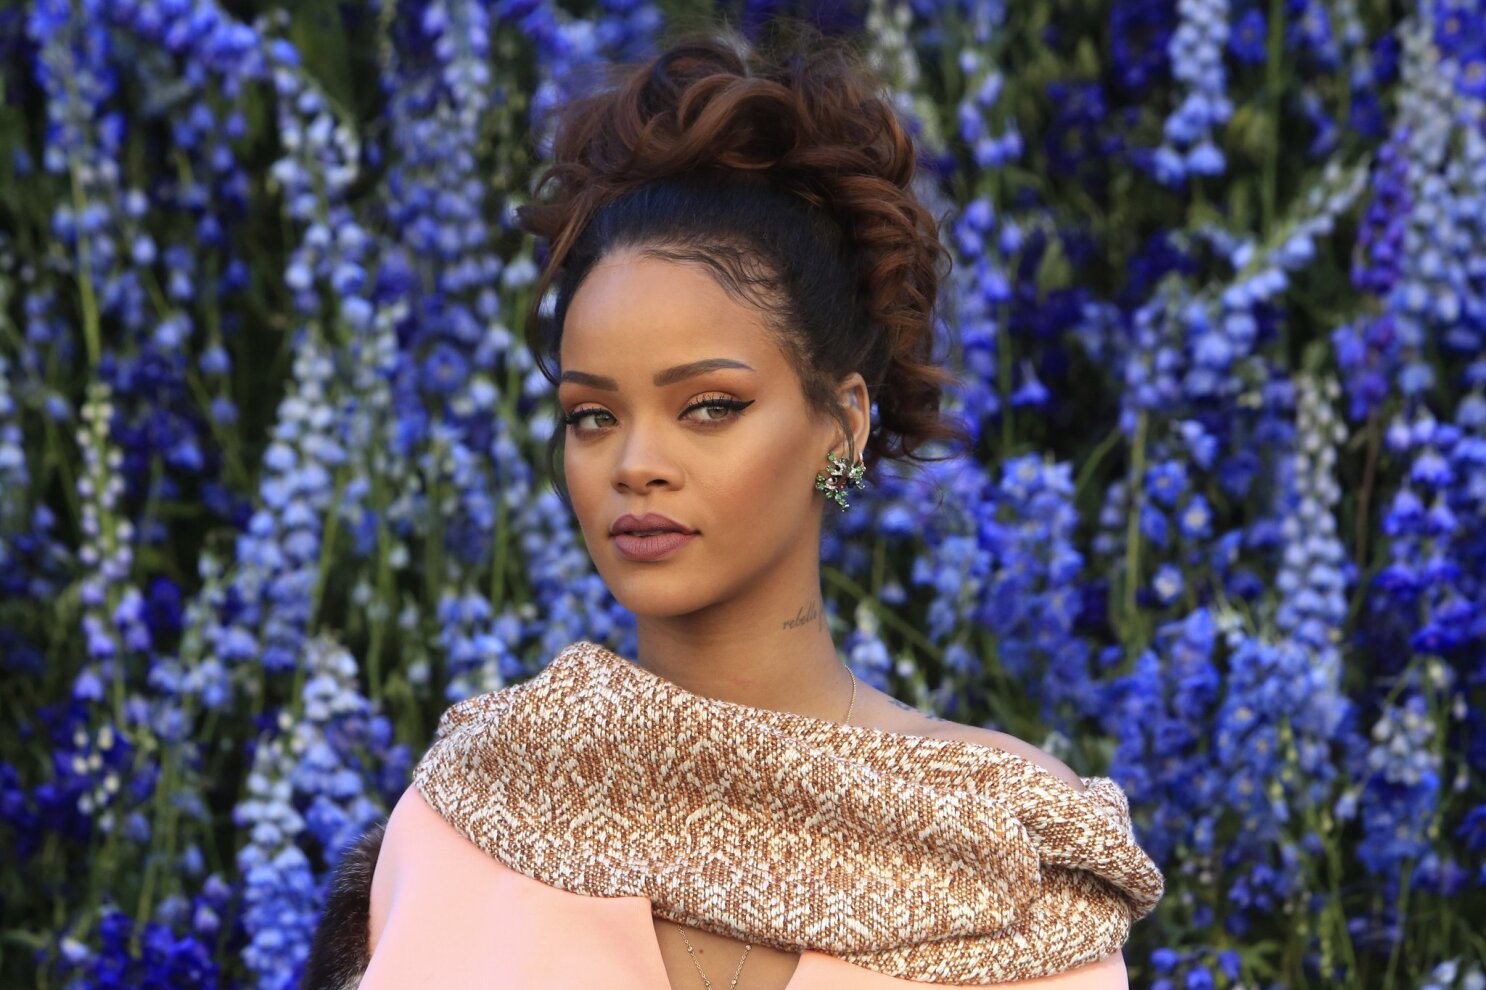 Rihanna Launches New Beauty And Stylist Agency Fr8me The San Diego Union Tribune